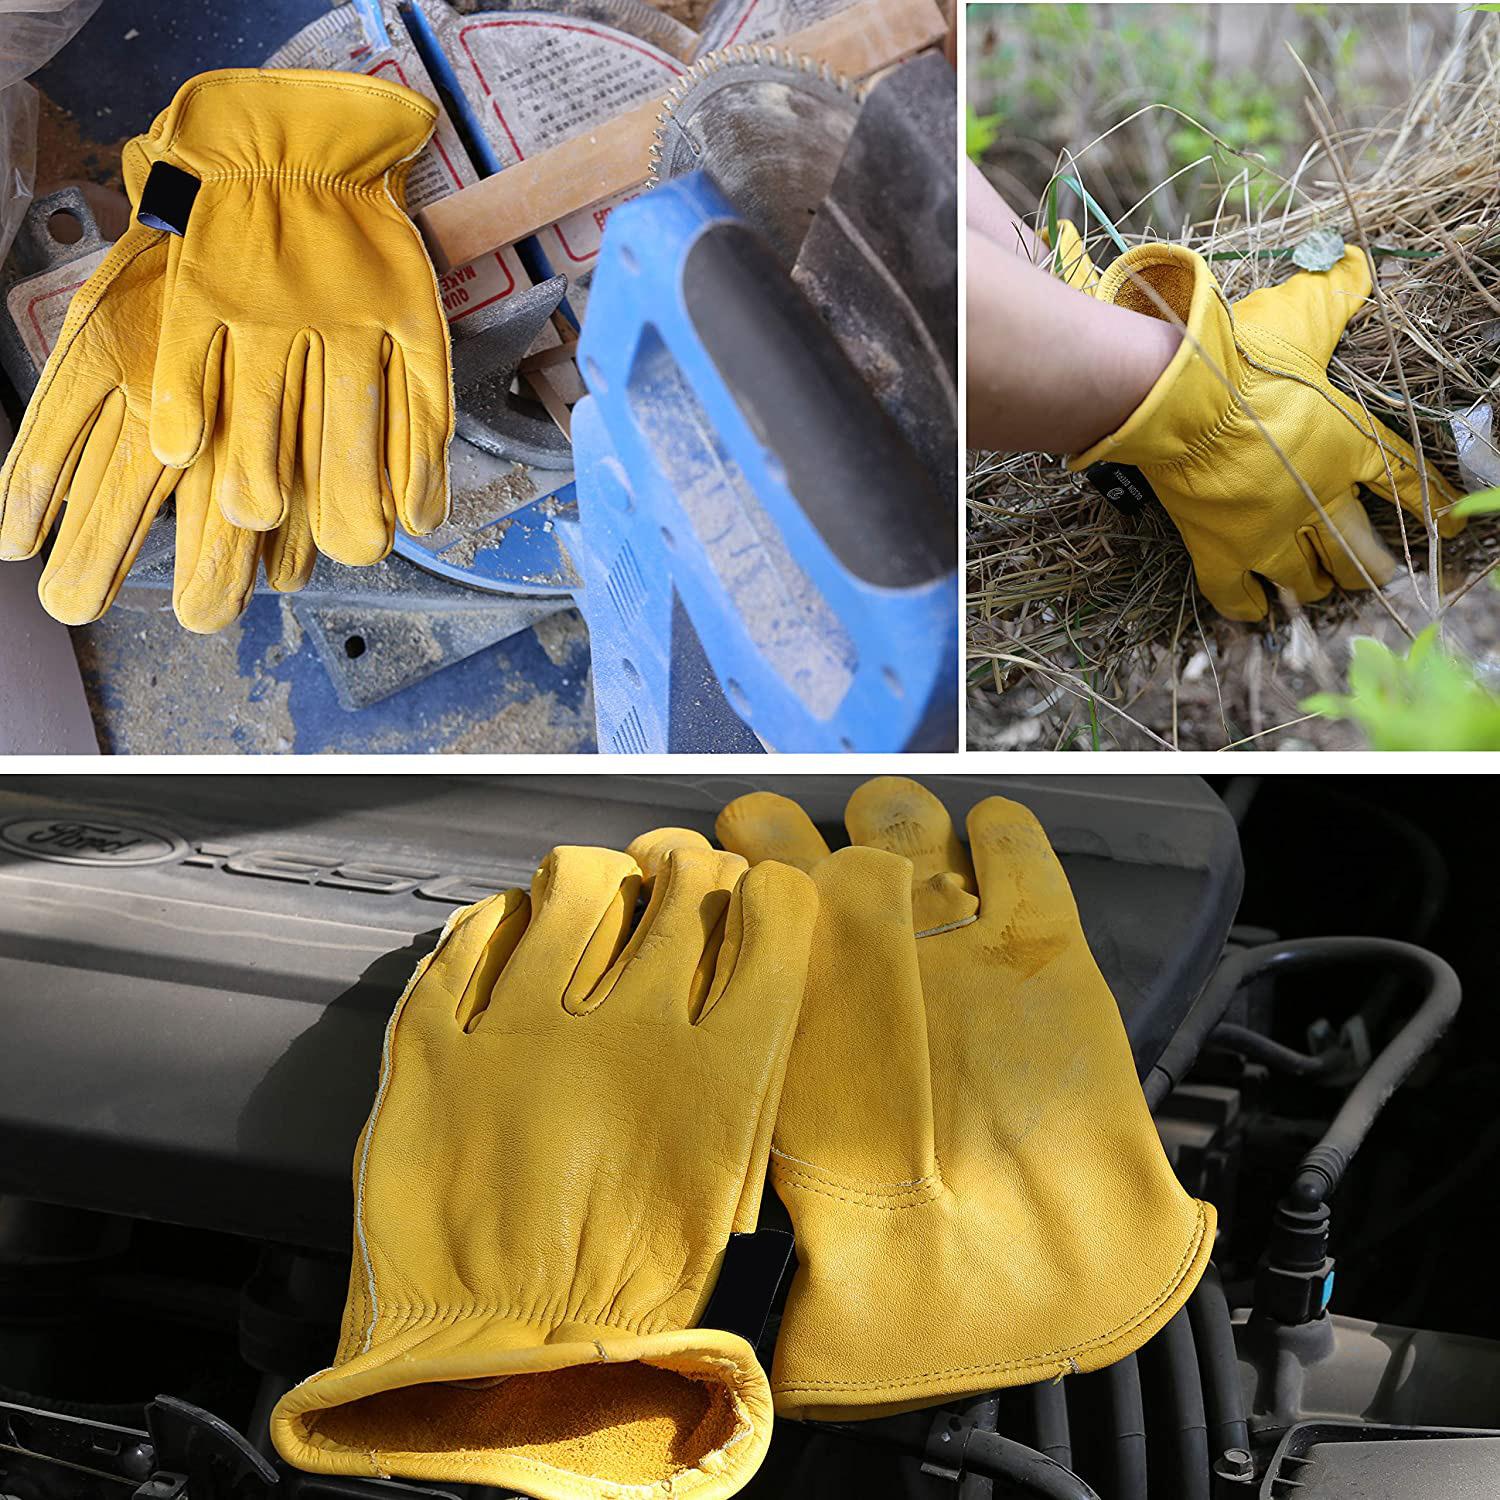 Cheap yellow sheepskinLeather Heavy Work Cut Resistant Construction Safety Gloves